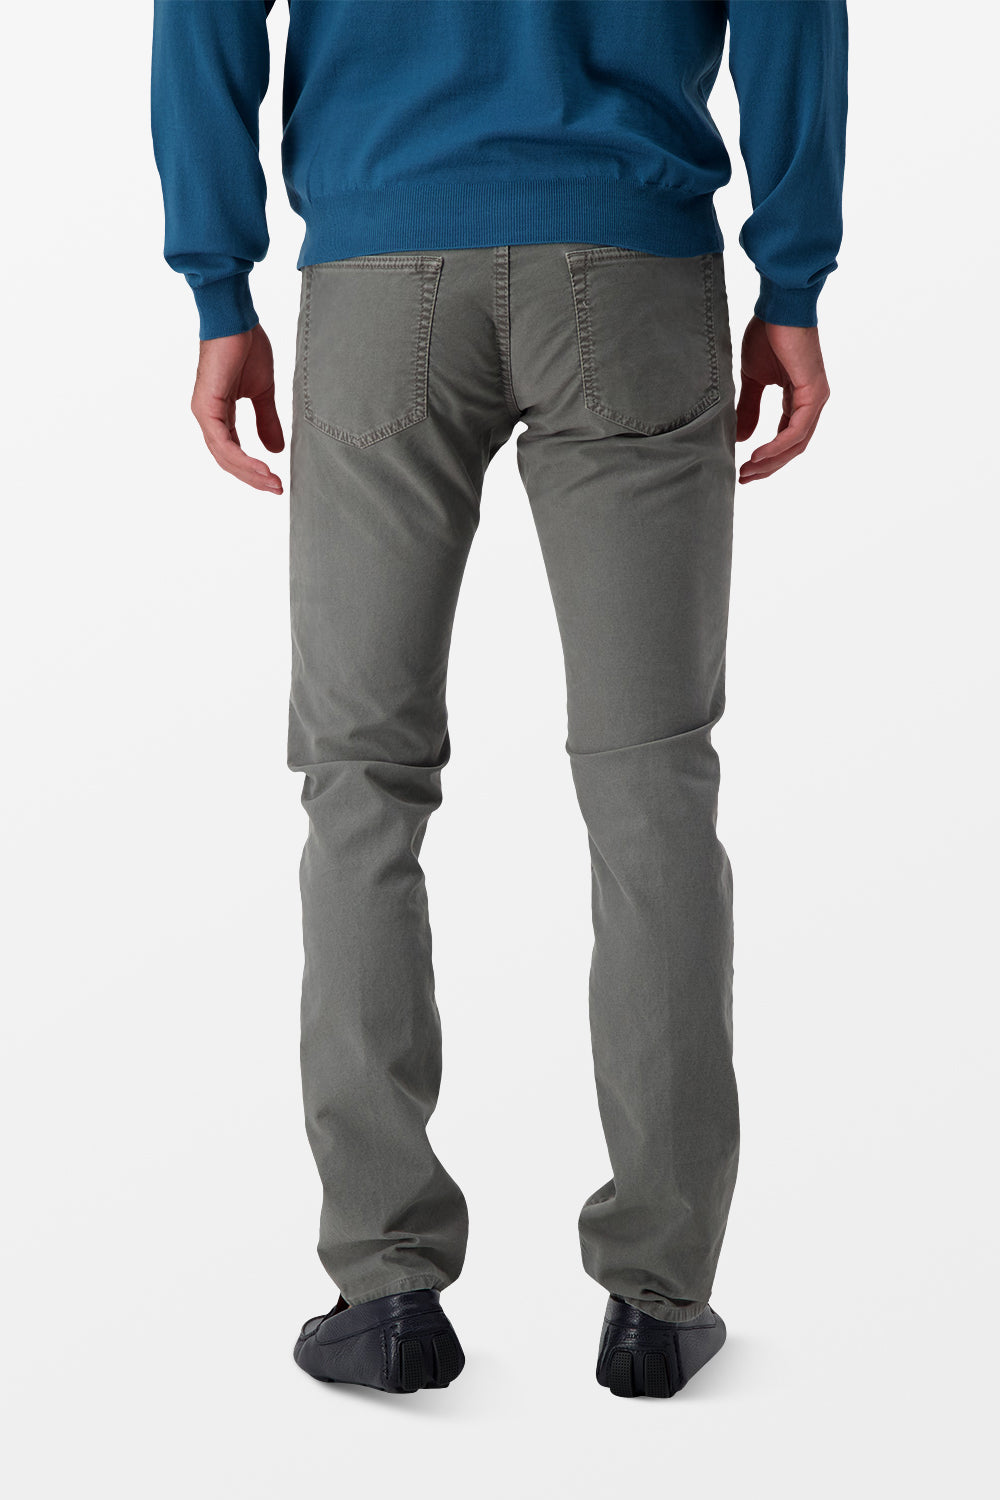 Incotex Grey Casual Trousers